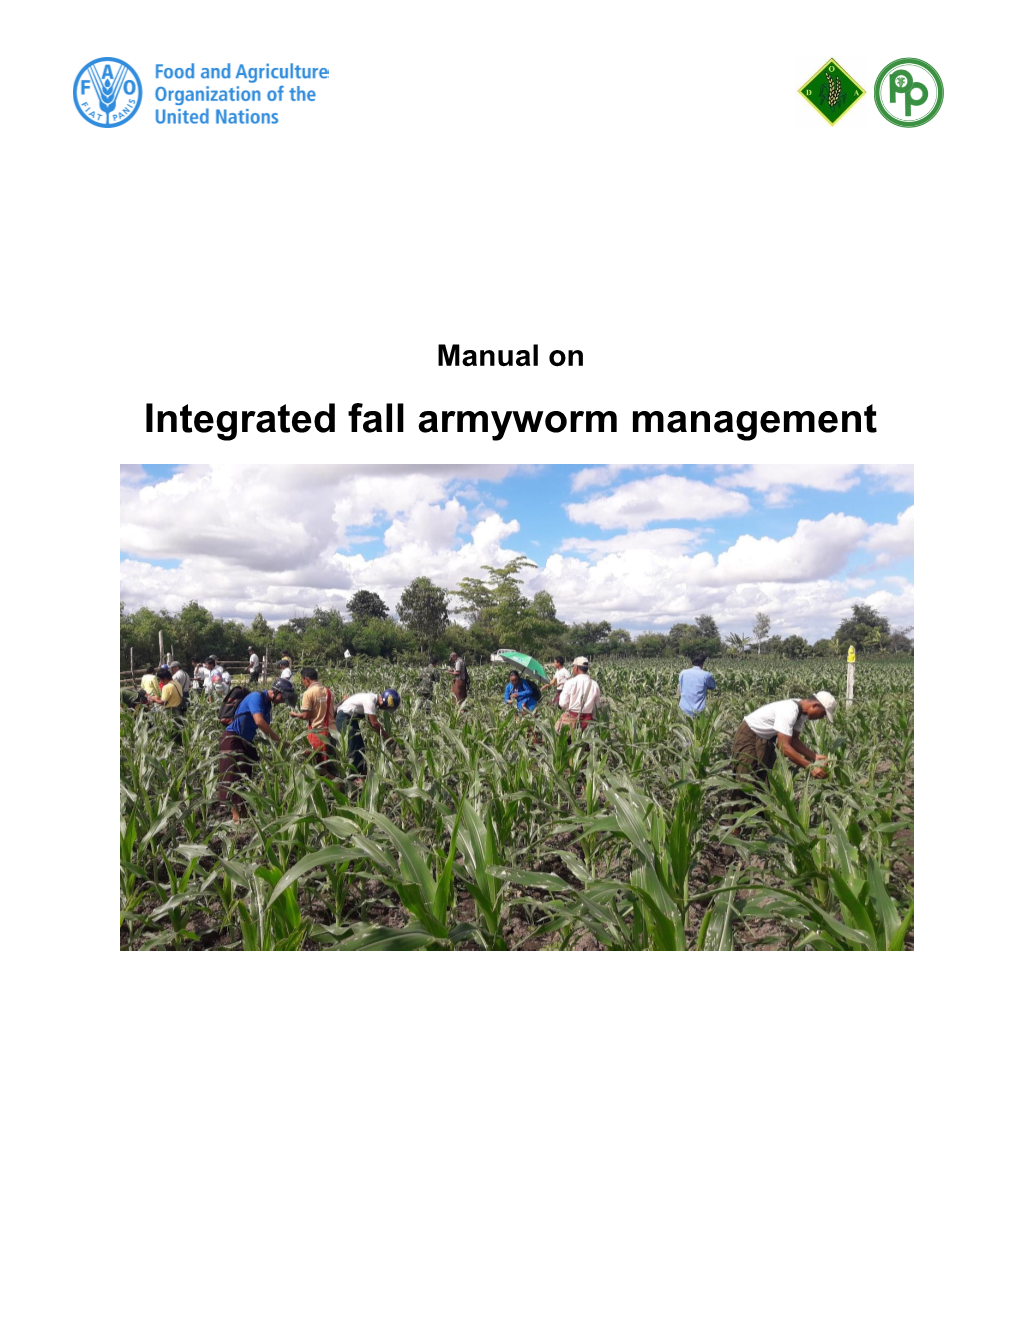 Manual on Integrated Fall Armyworm Management